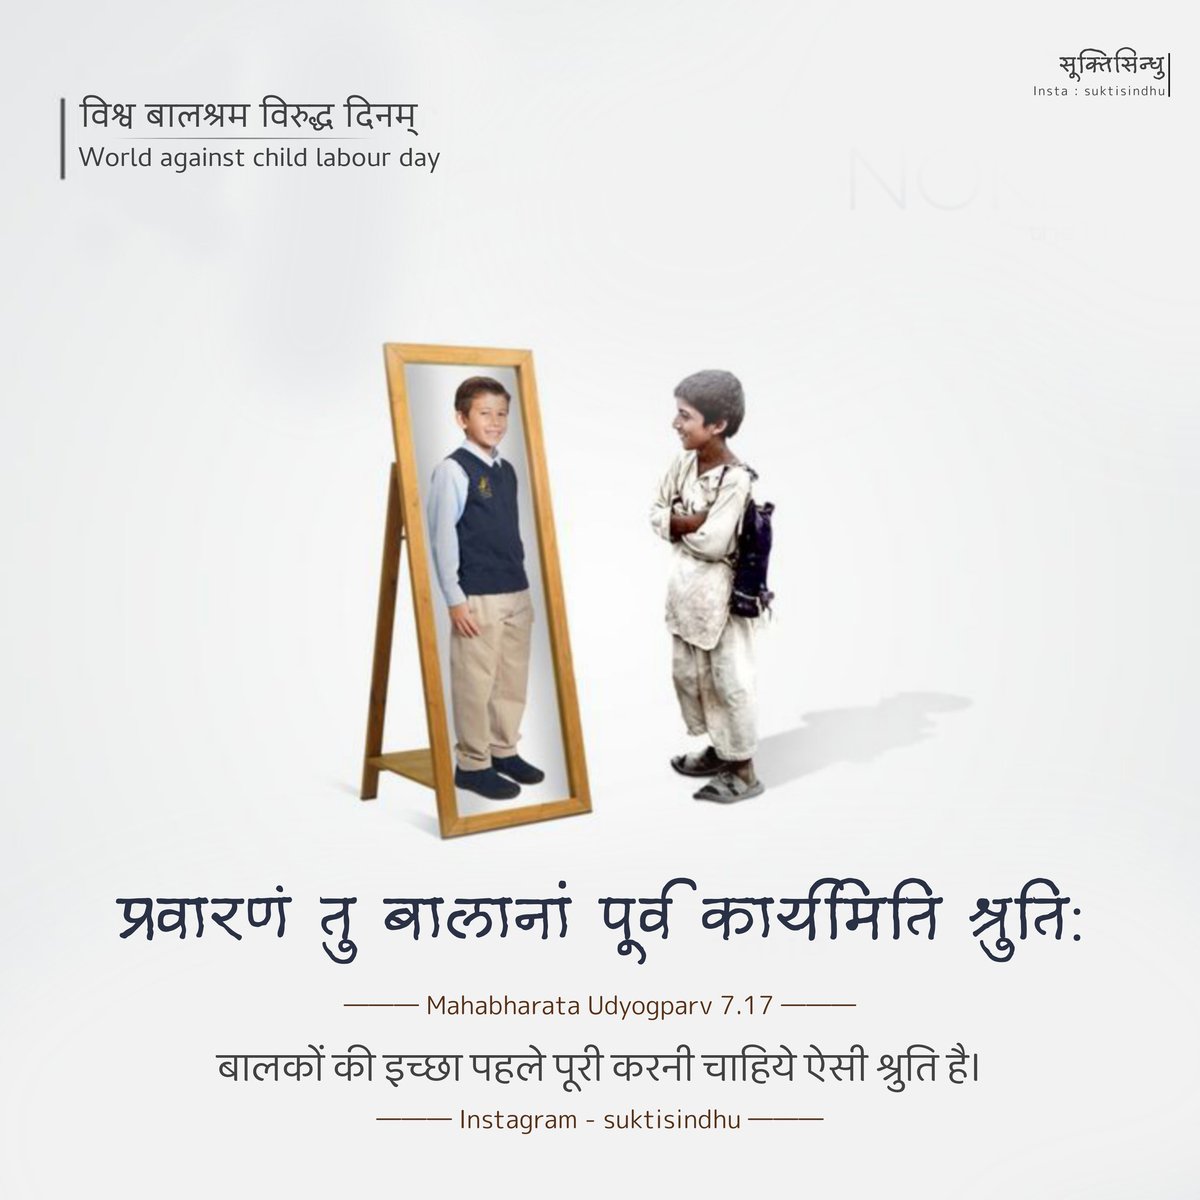 #antichildlabourday #WorldDayAgainstChildLabour 

Educate a chlid or help him to educate/live a better life.